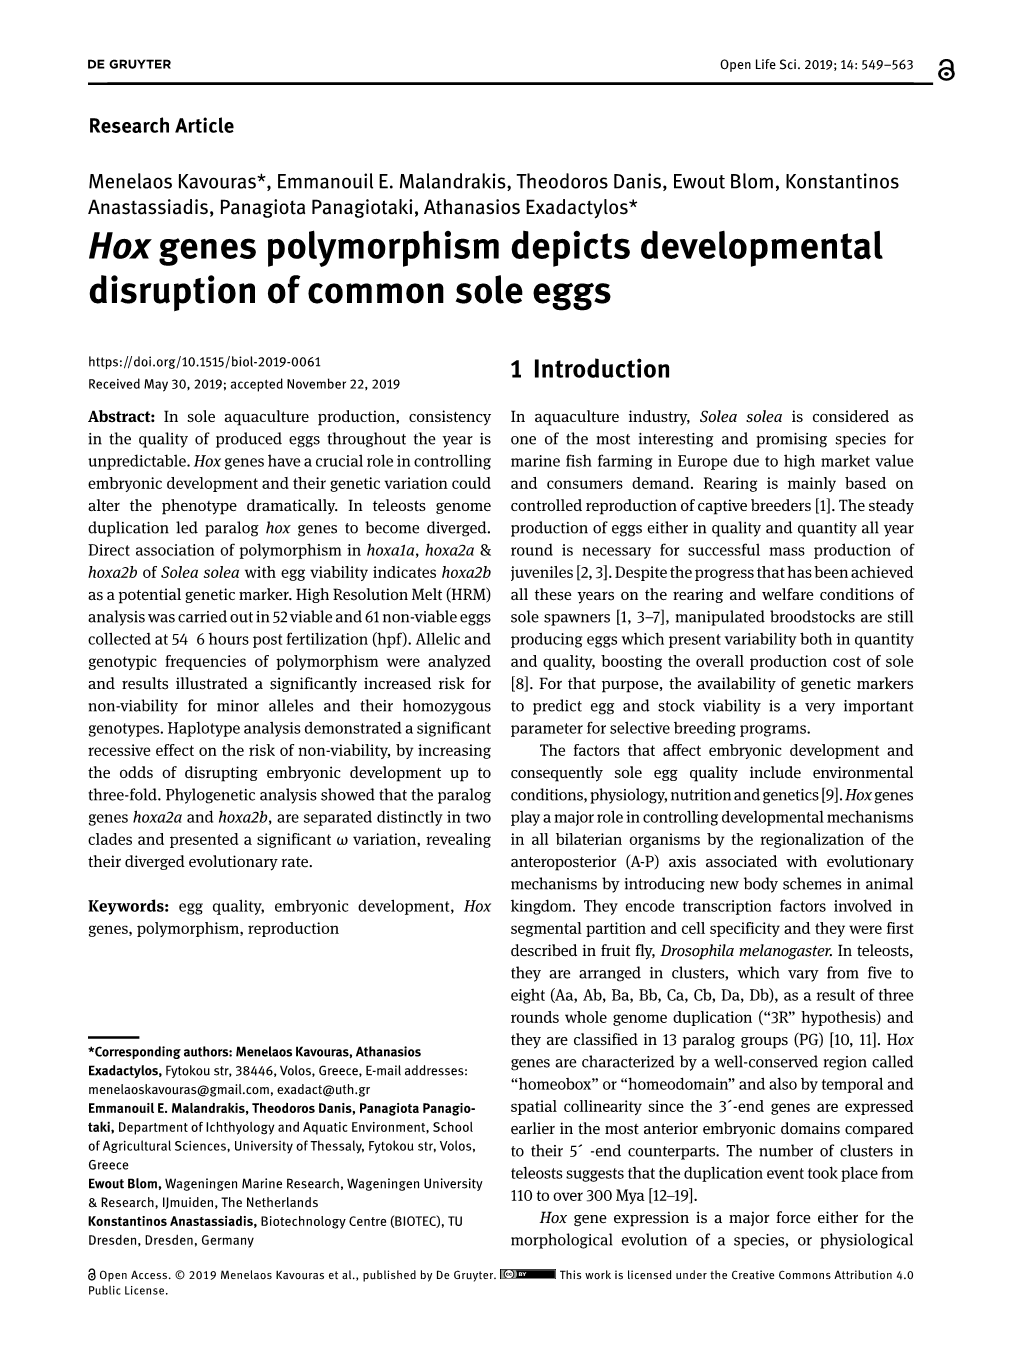 Hox Genes Polymorphism Depicts Developmental Disruption of Common Sole Eggs